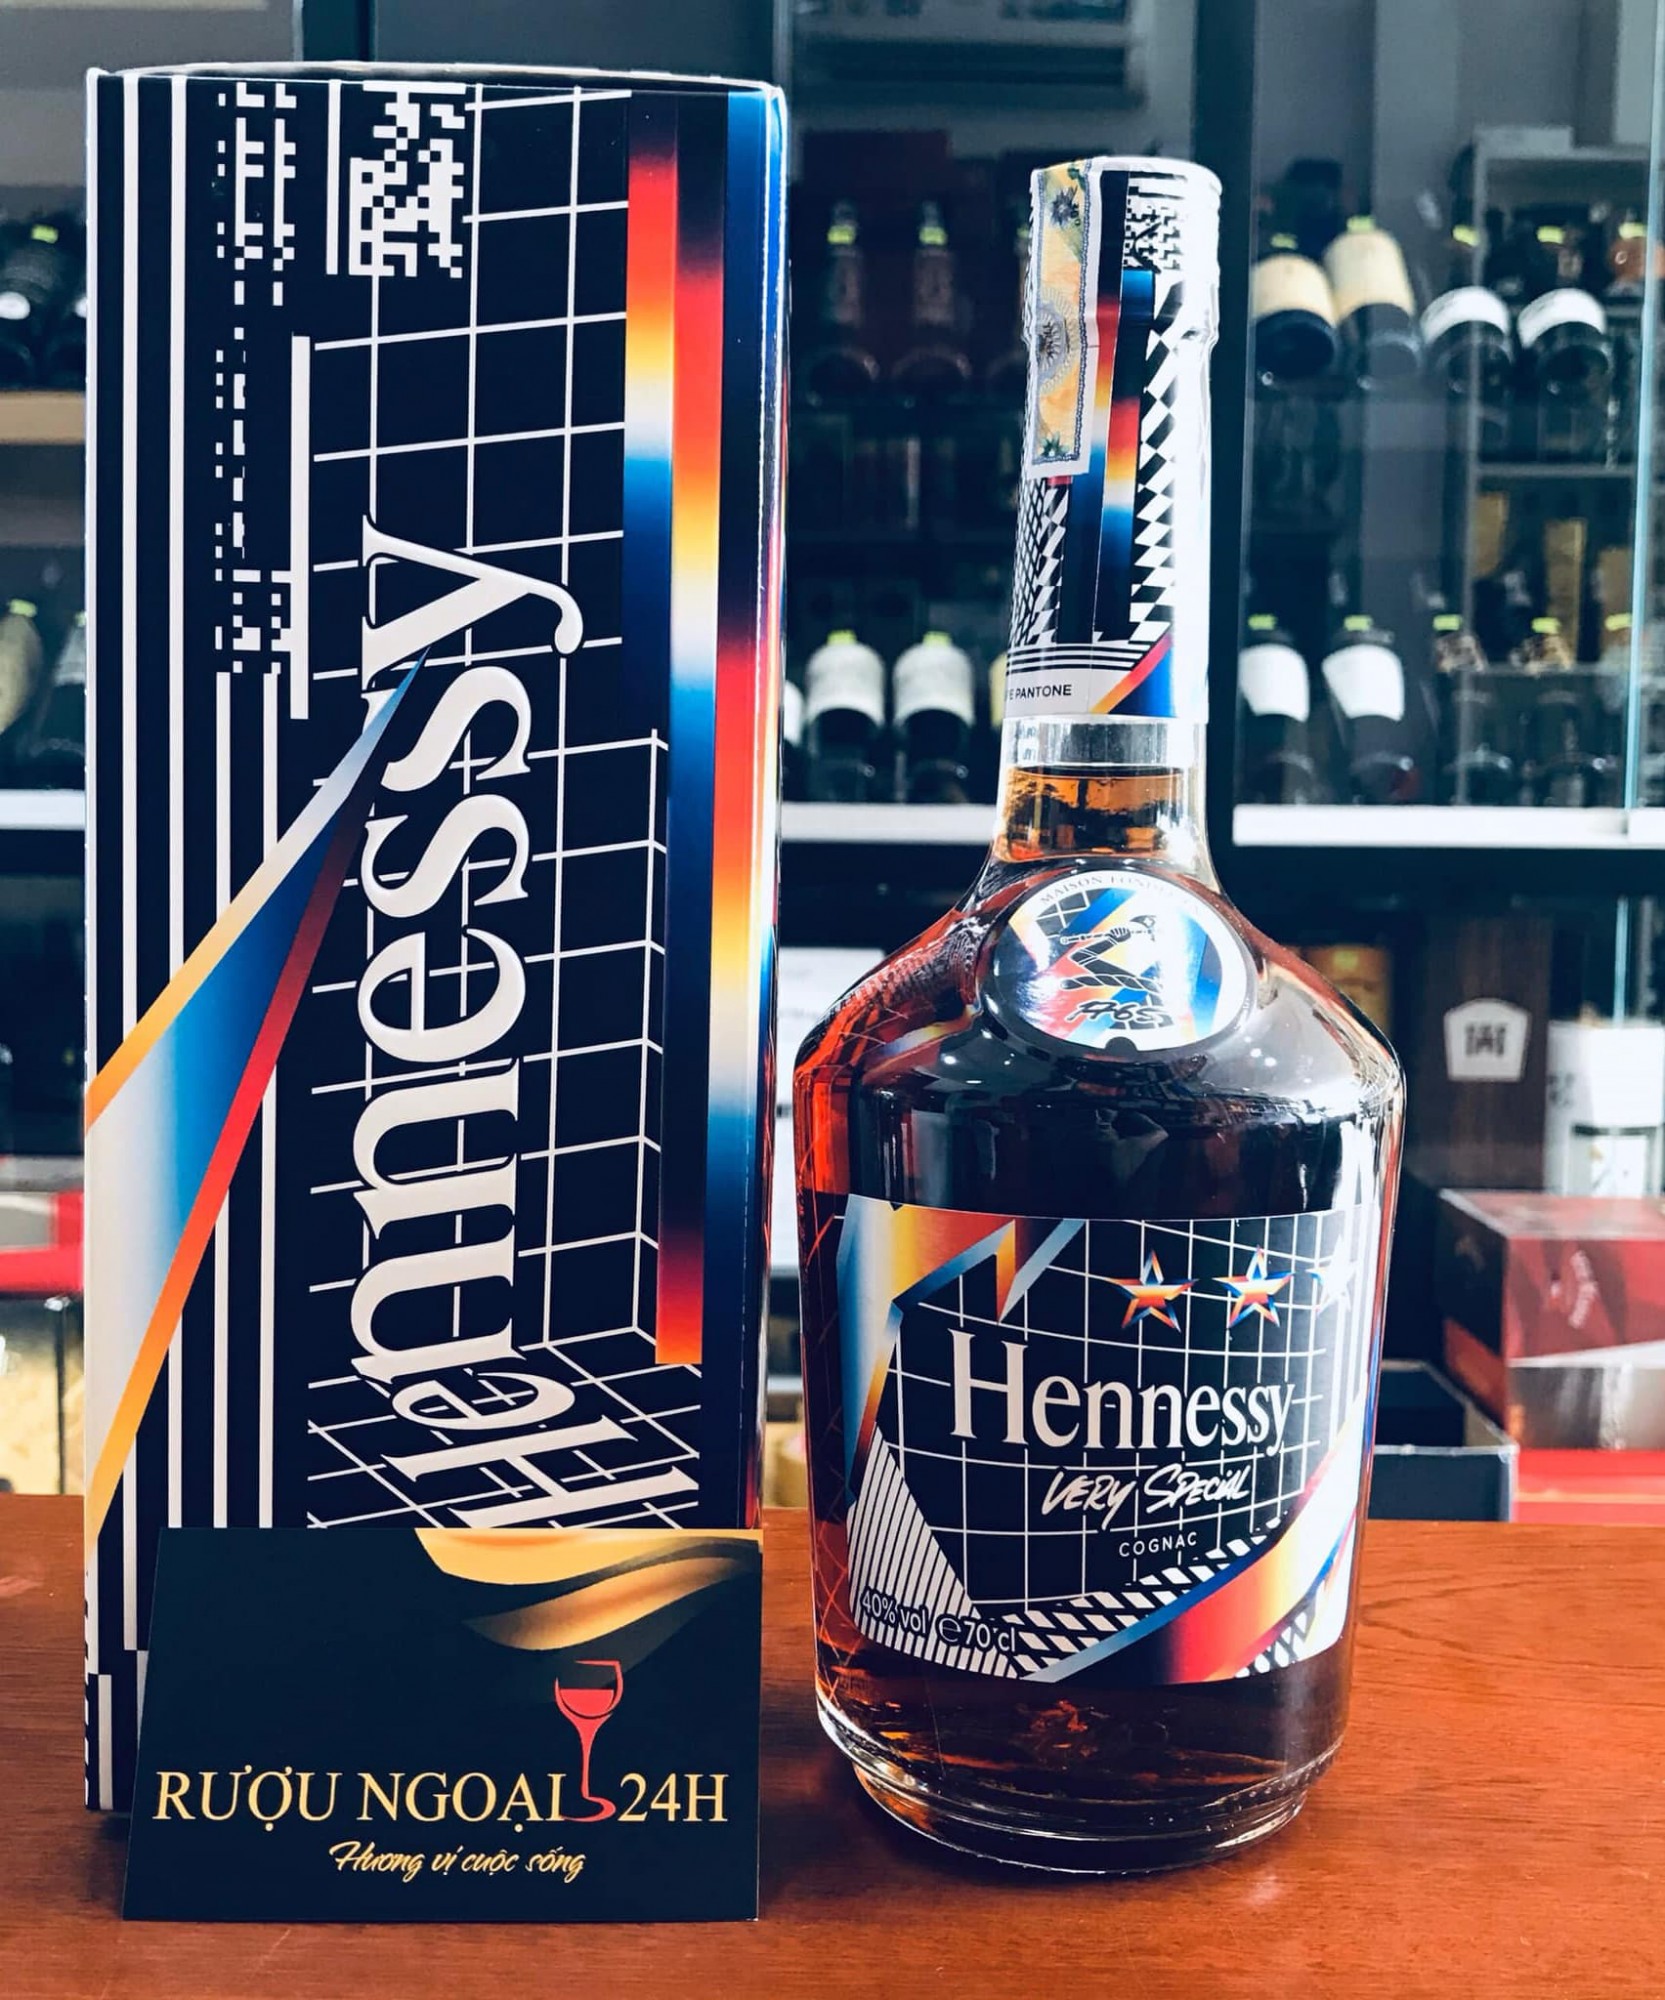 hennessy vs limited f20 1n